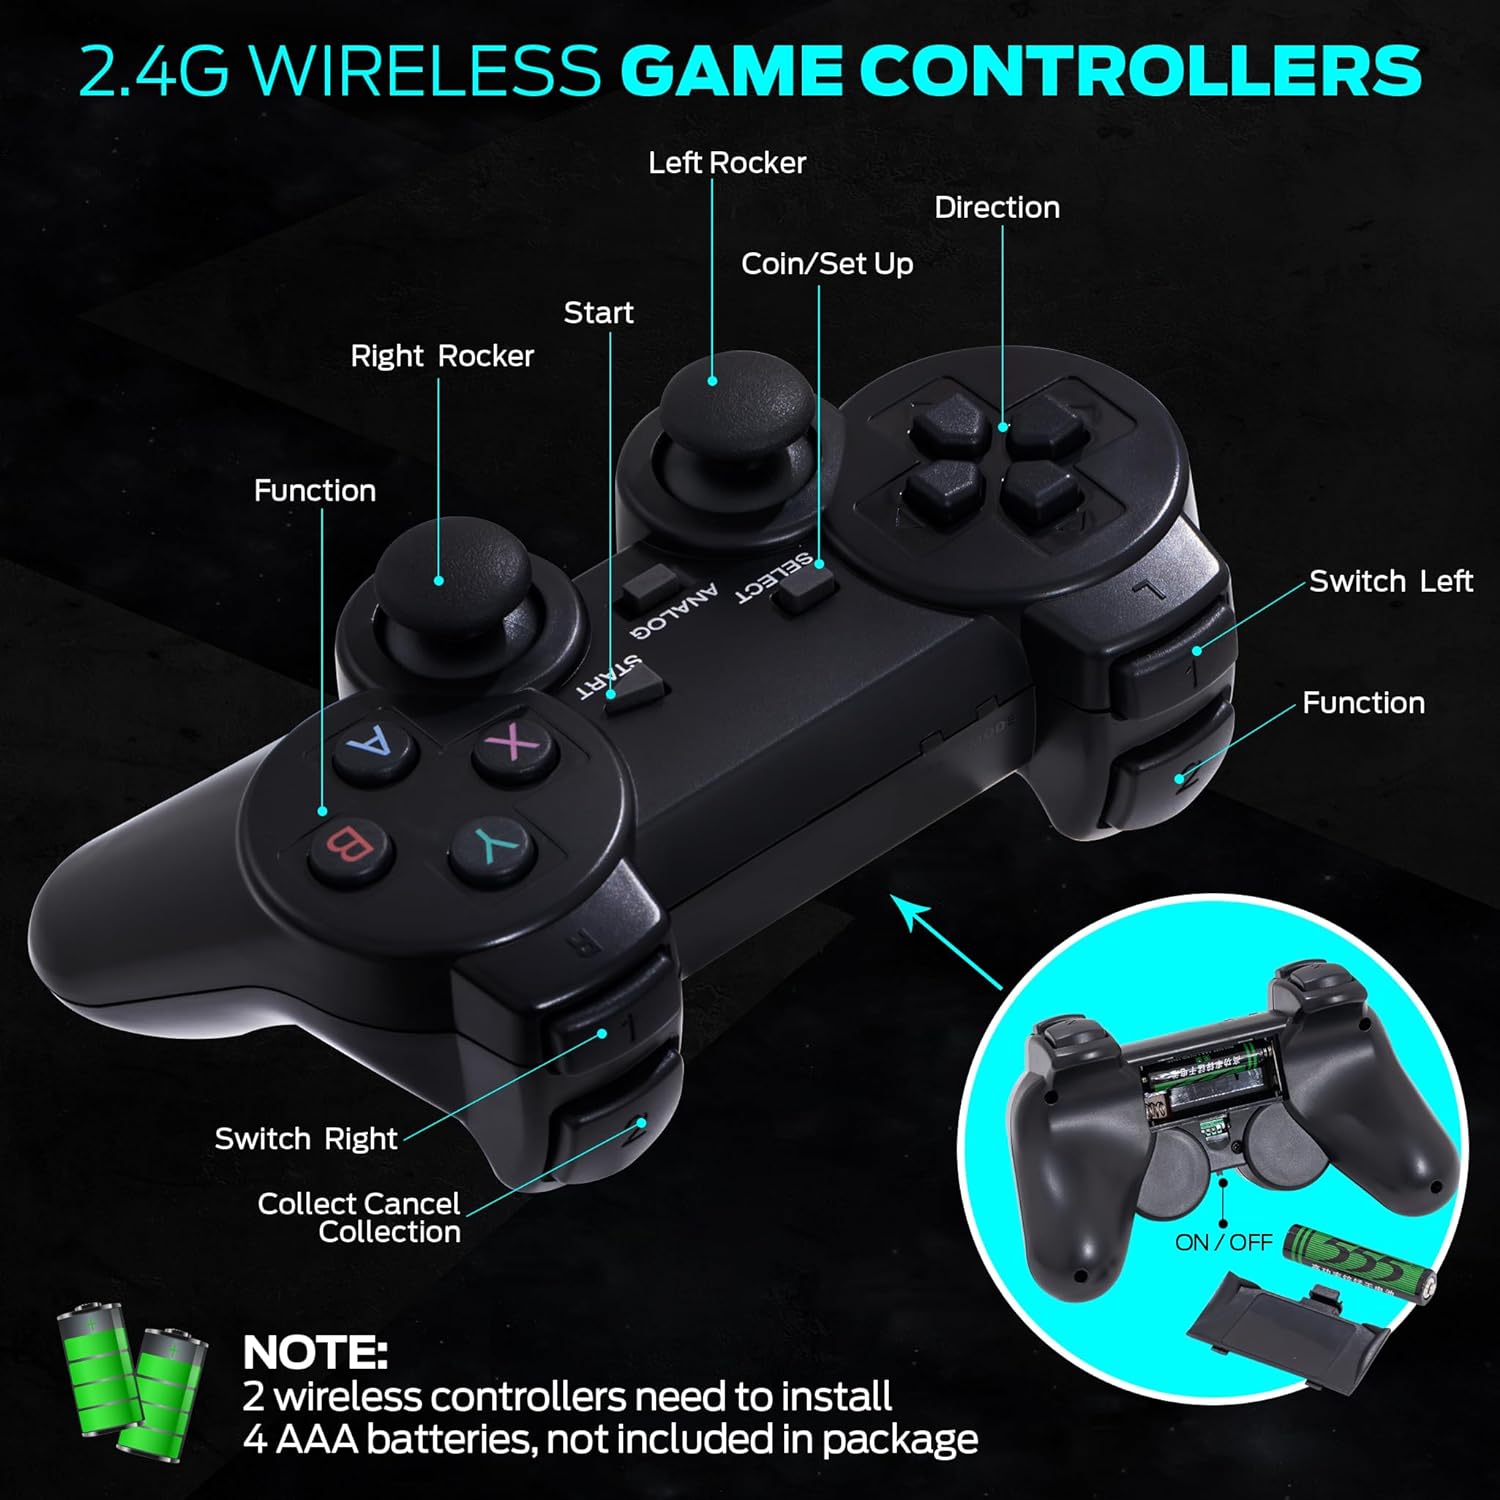 Retro Game Stick, Retro Game Console, Plug & Play Video TV Game Stick with 20000+ Games Built-in, 64G, 4K HDMI Output, 9 Classic Emulators, Dual 2.4G Wireless Retro Game Console